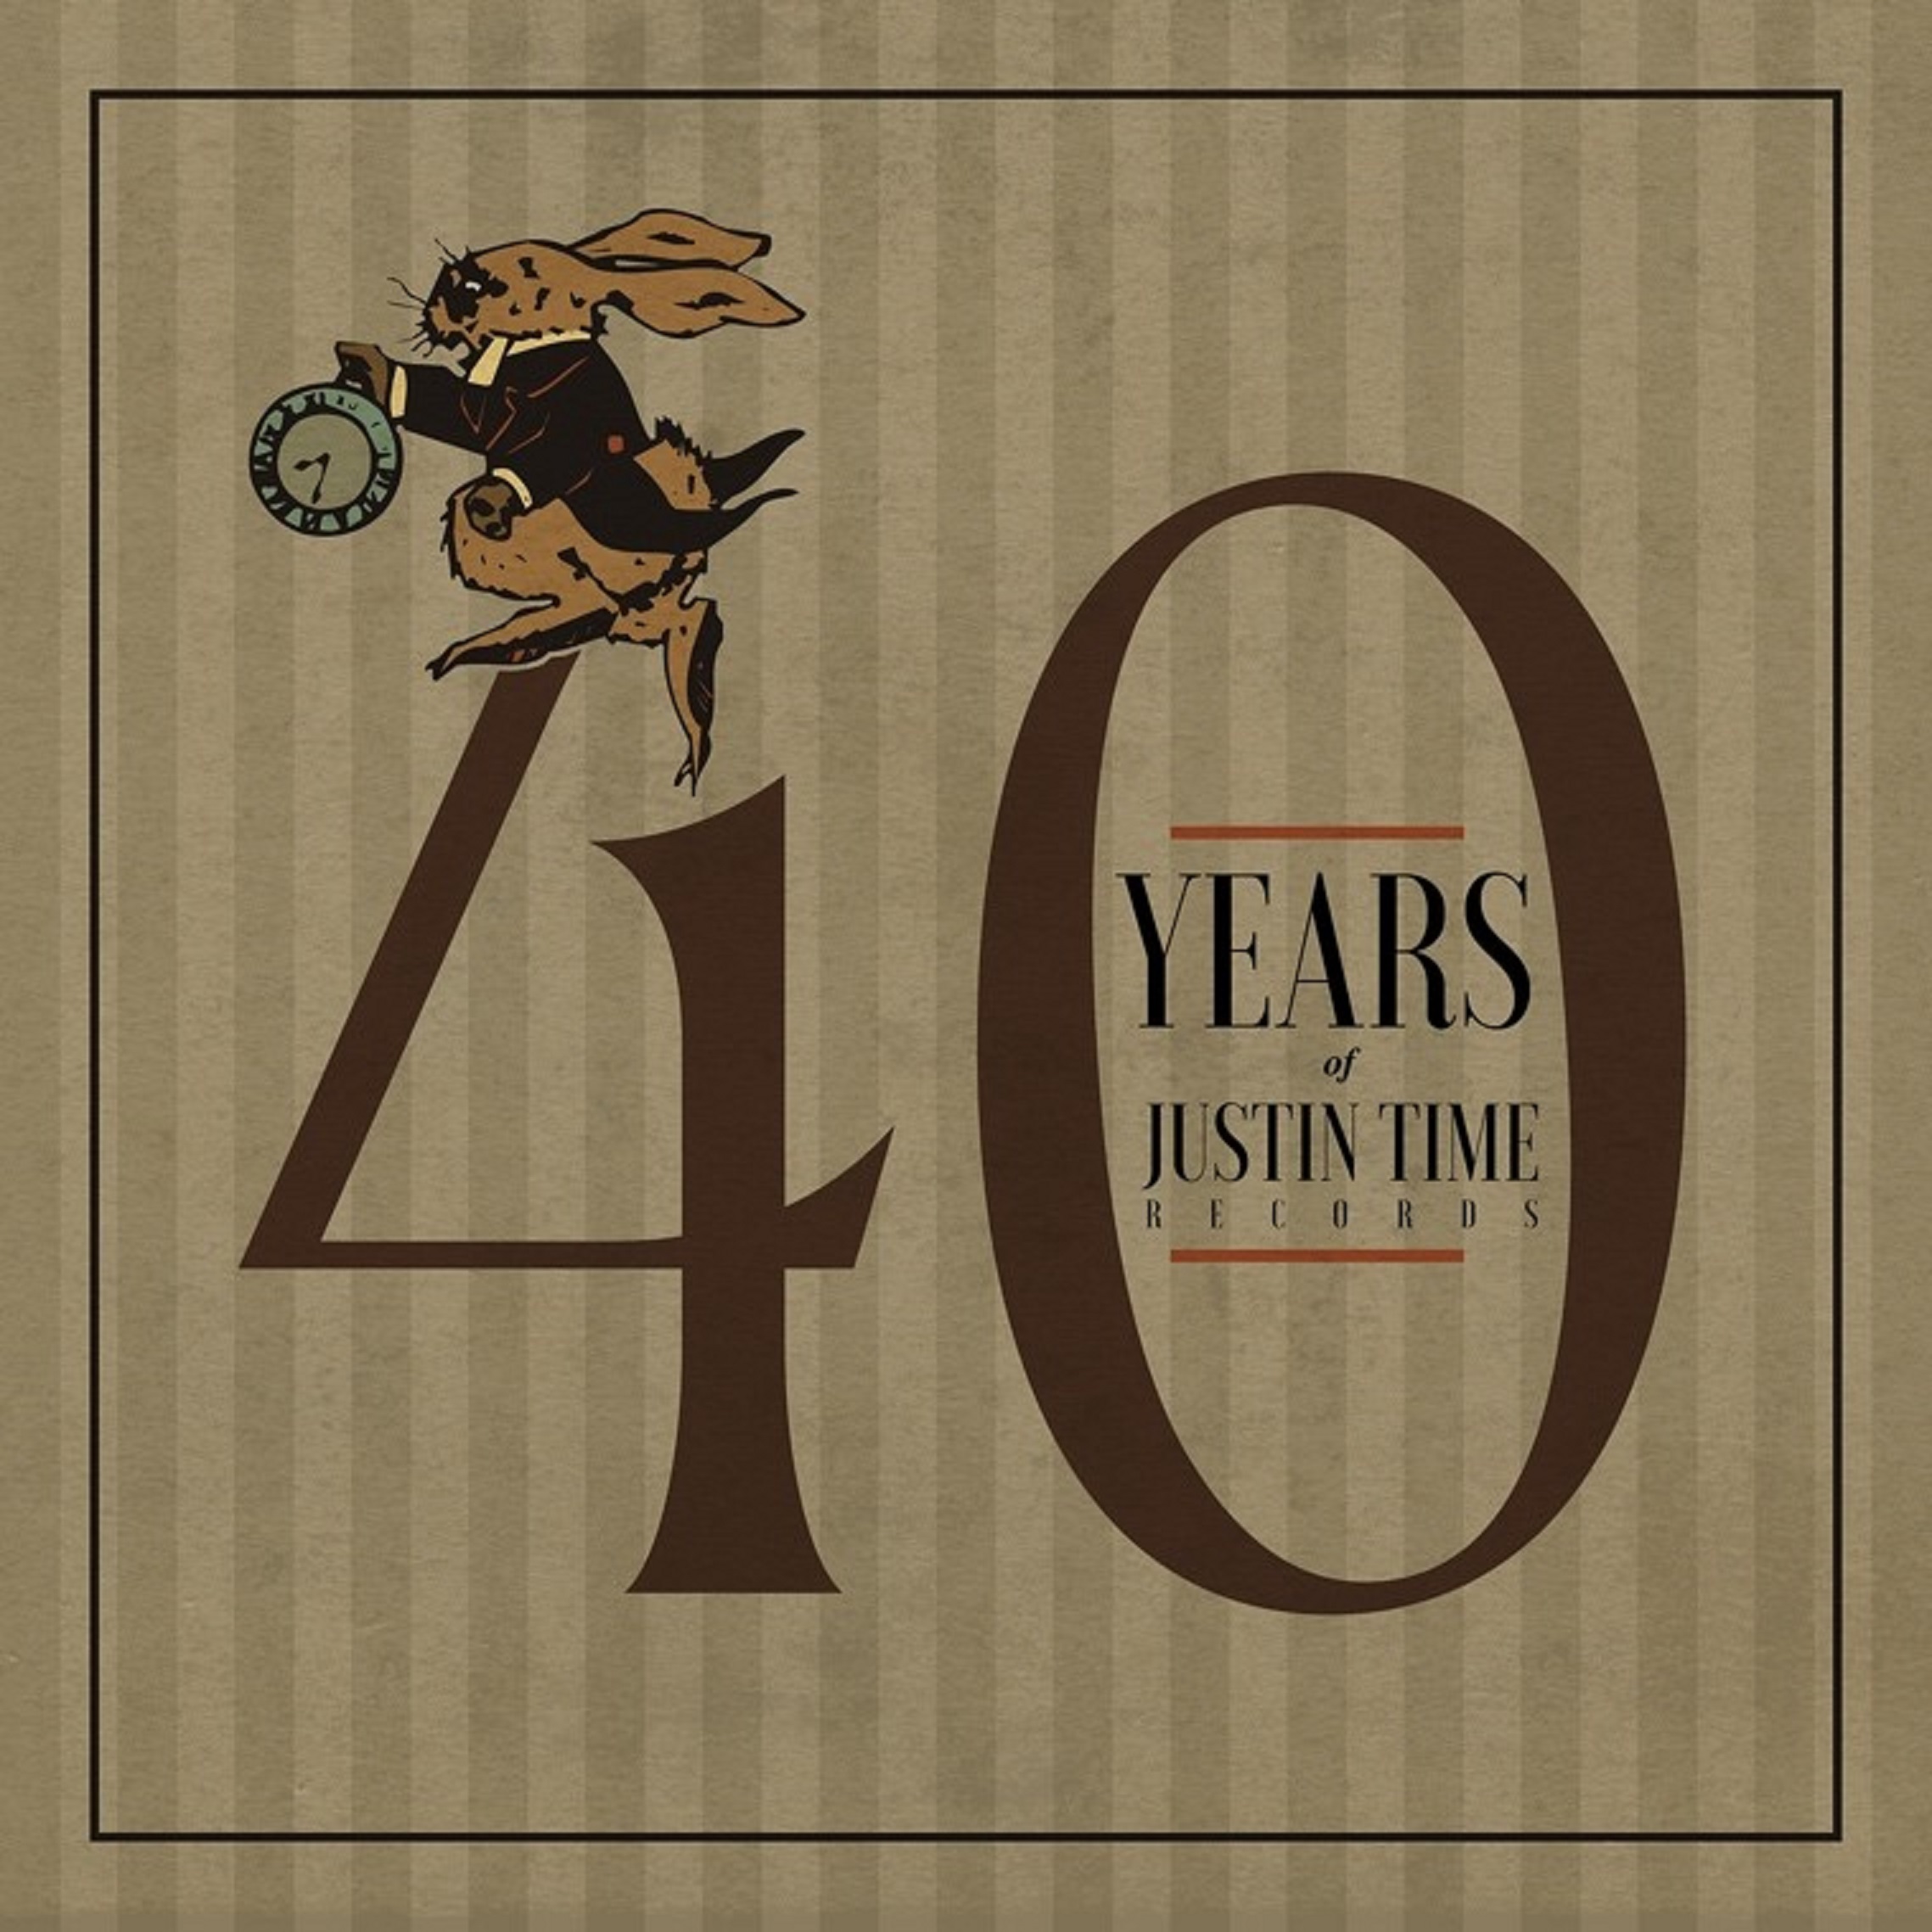 LONG-RUNNING CANADIAN JAZZ, BLUES & GOSPEL LABEL  JUSTIN TIME RECORDS CELEBRATES 40TH ANNIVERSARY